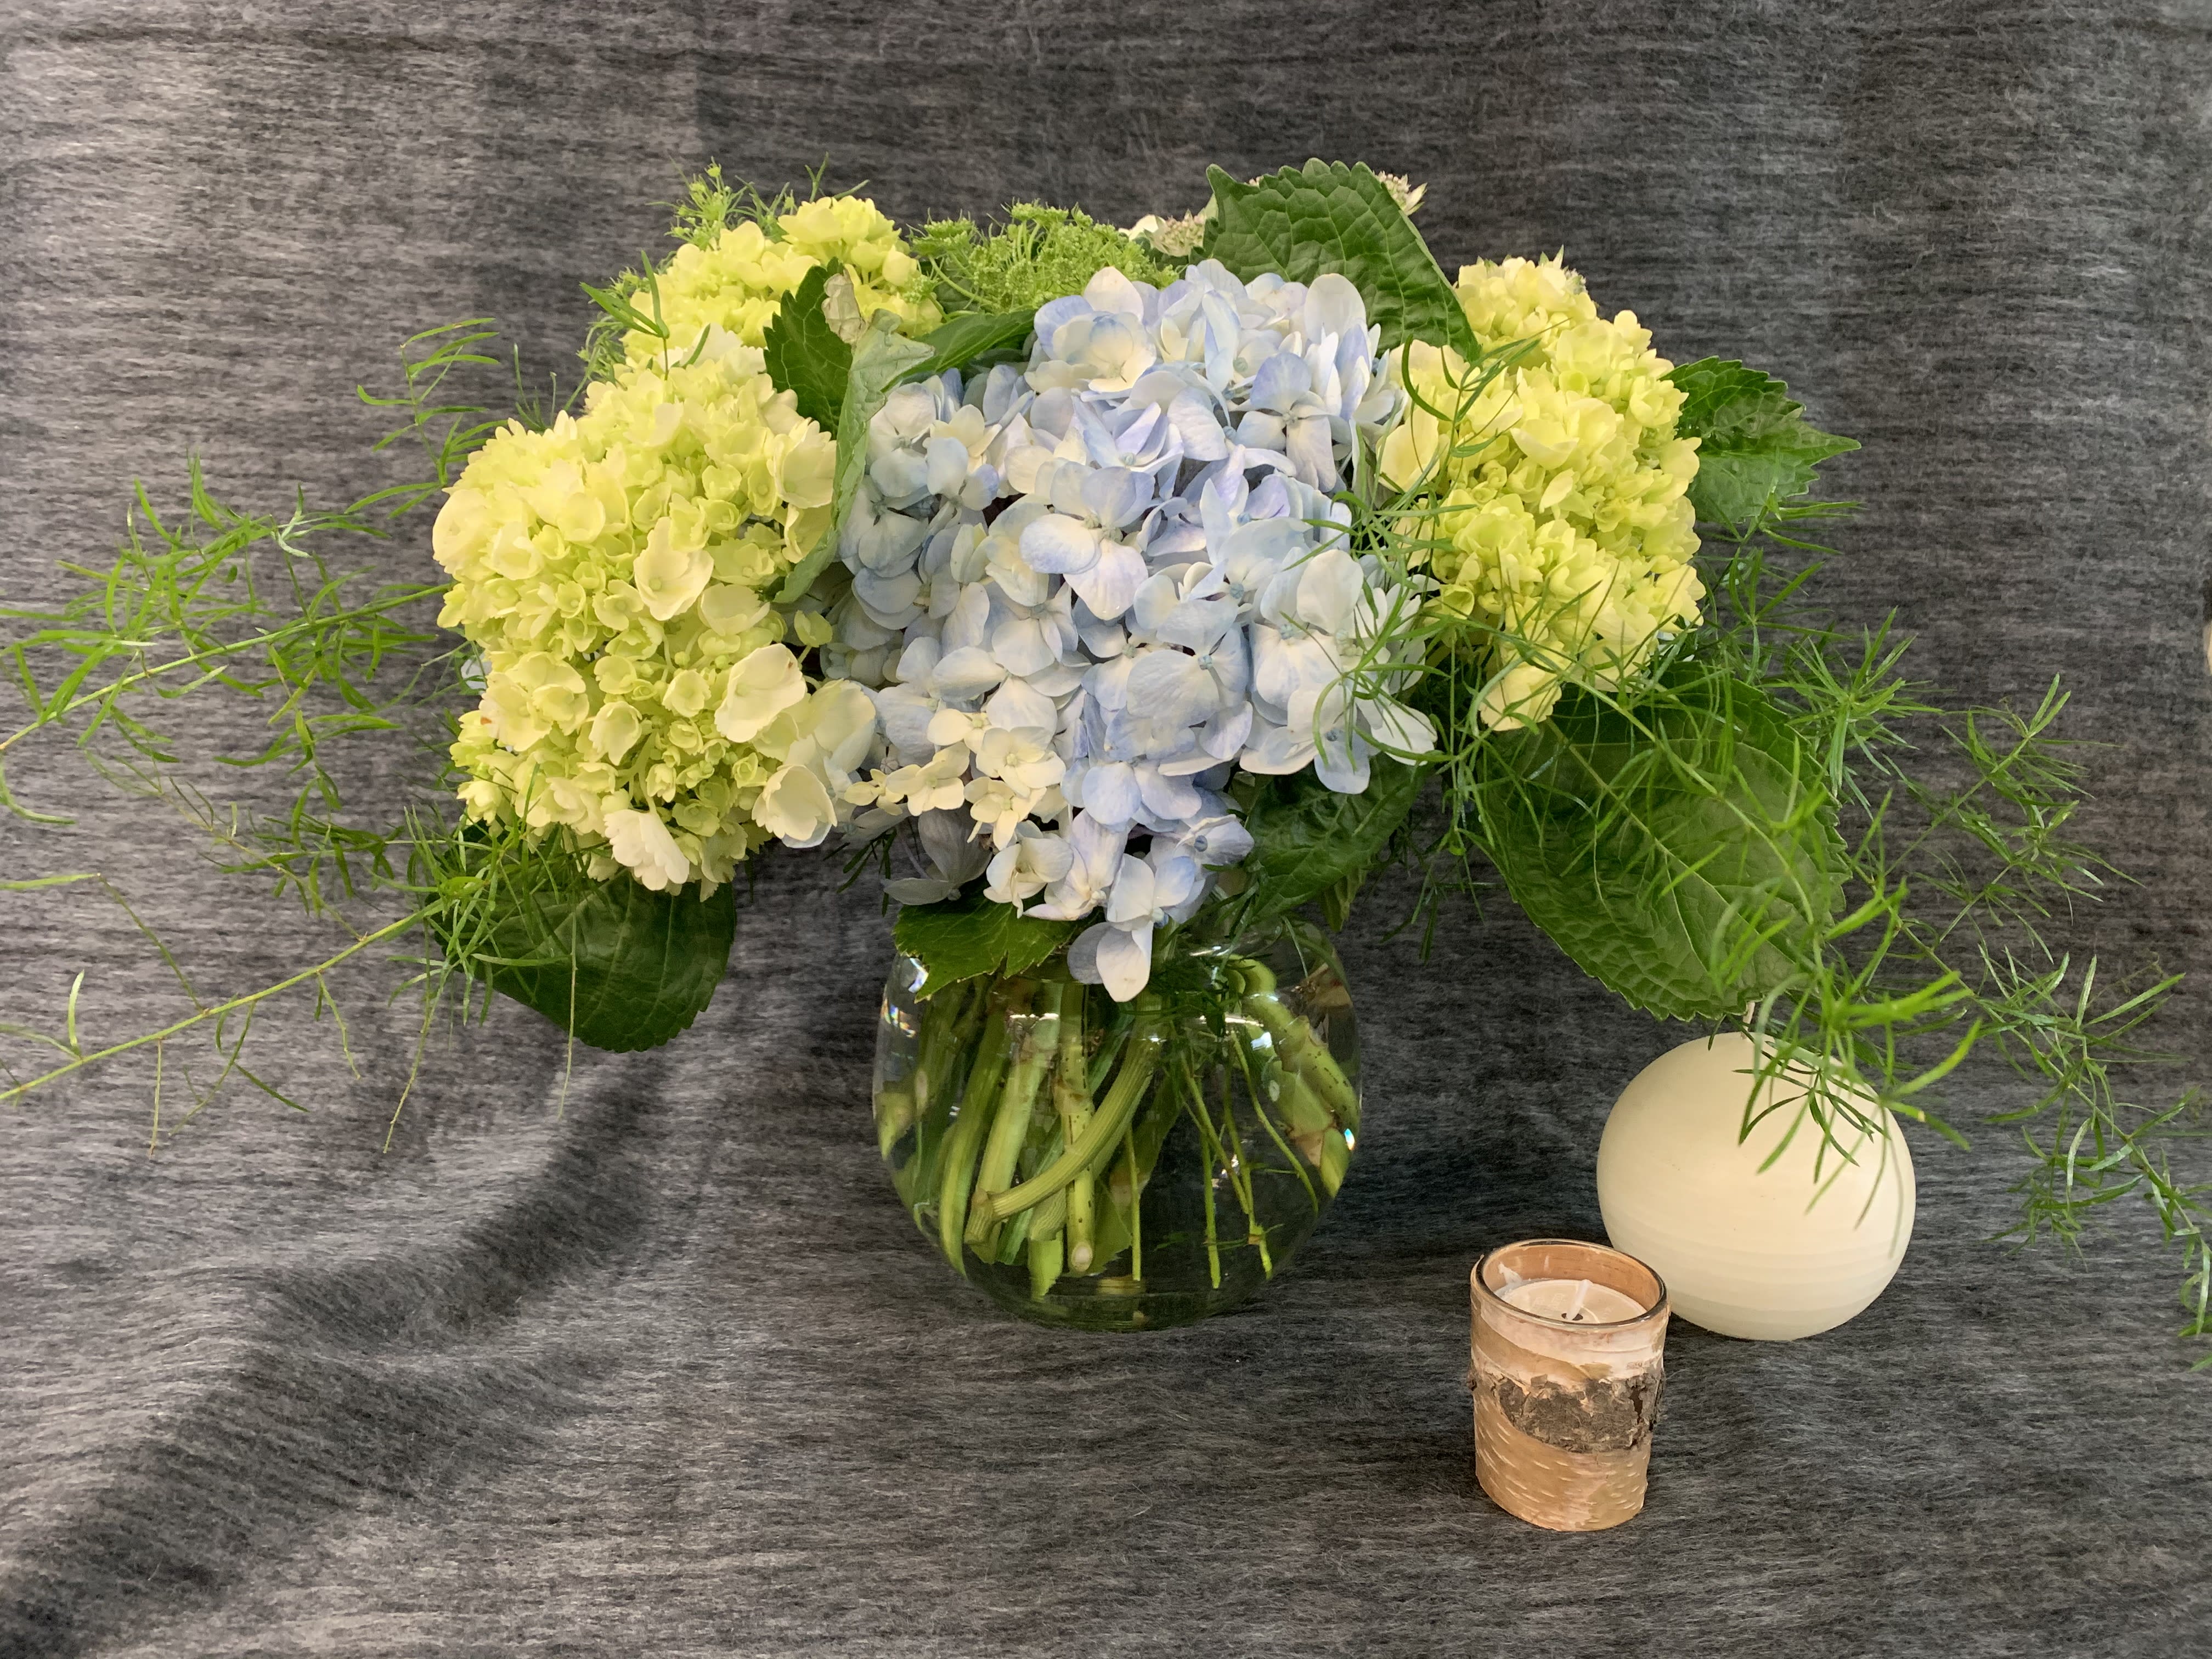 Hydrangea Bowl - Memories of summer, hydrangea are a perennial favorite. This brimming over bowl is abundant with green an blue blooms.